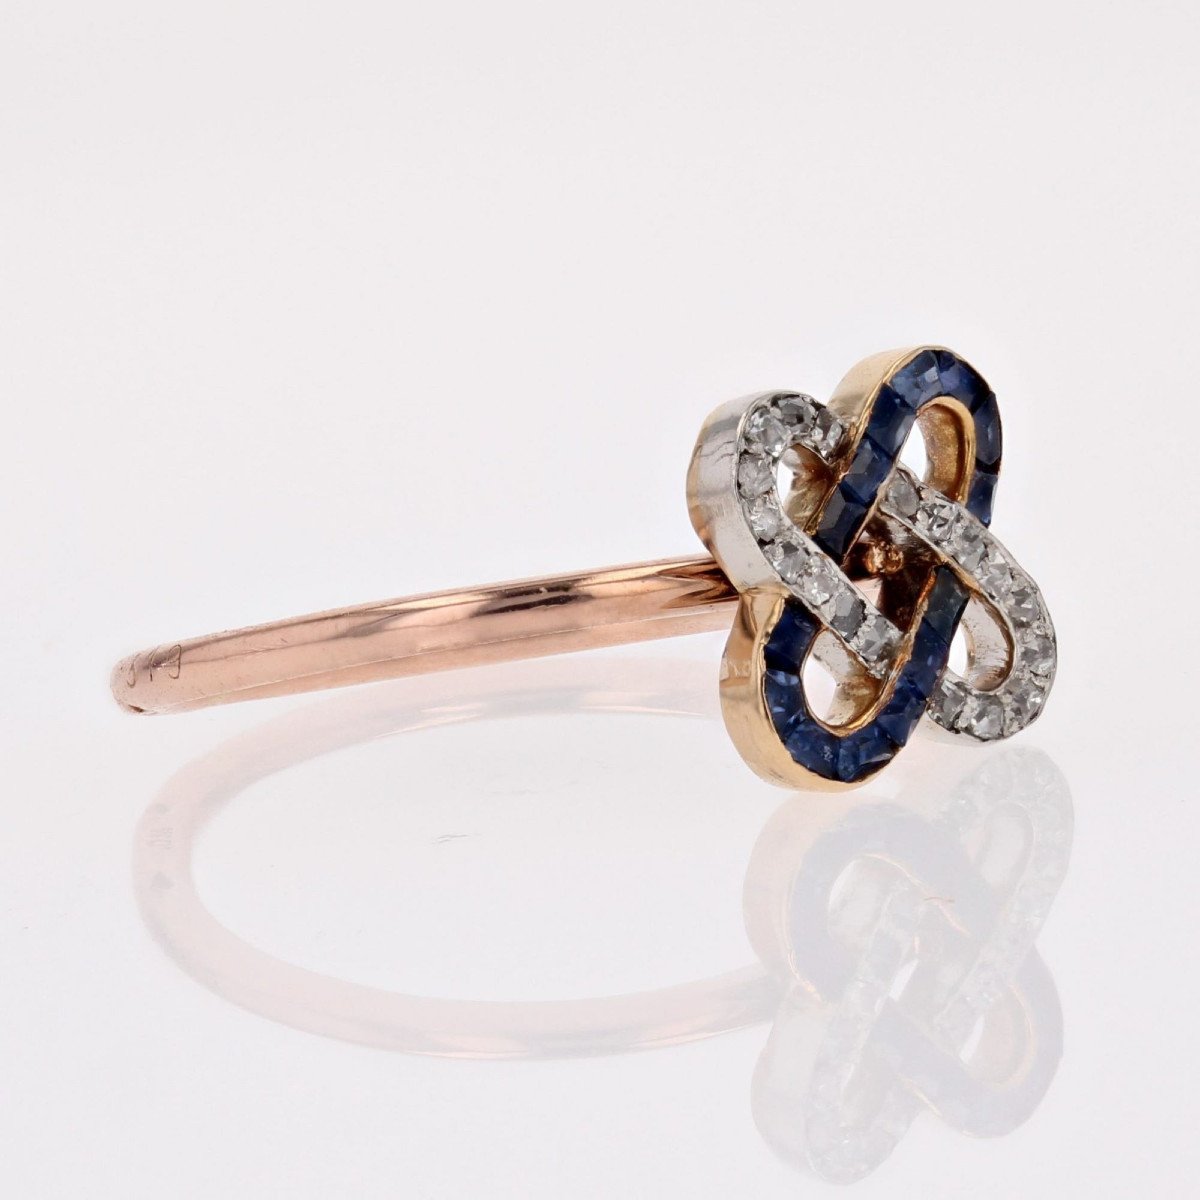 Old Ring With Diamonds And Sapphires-photo-6